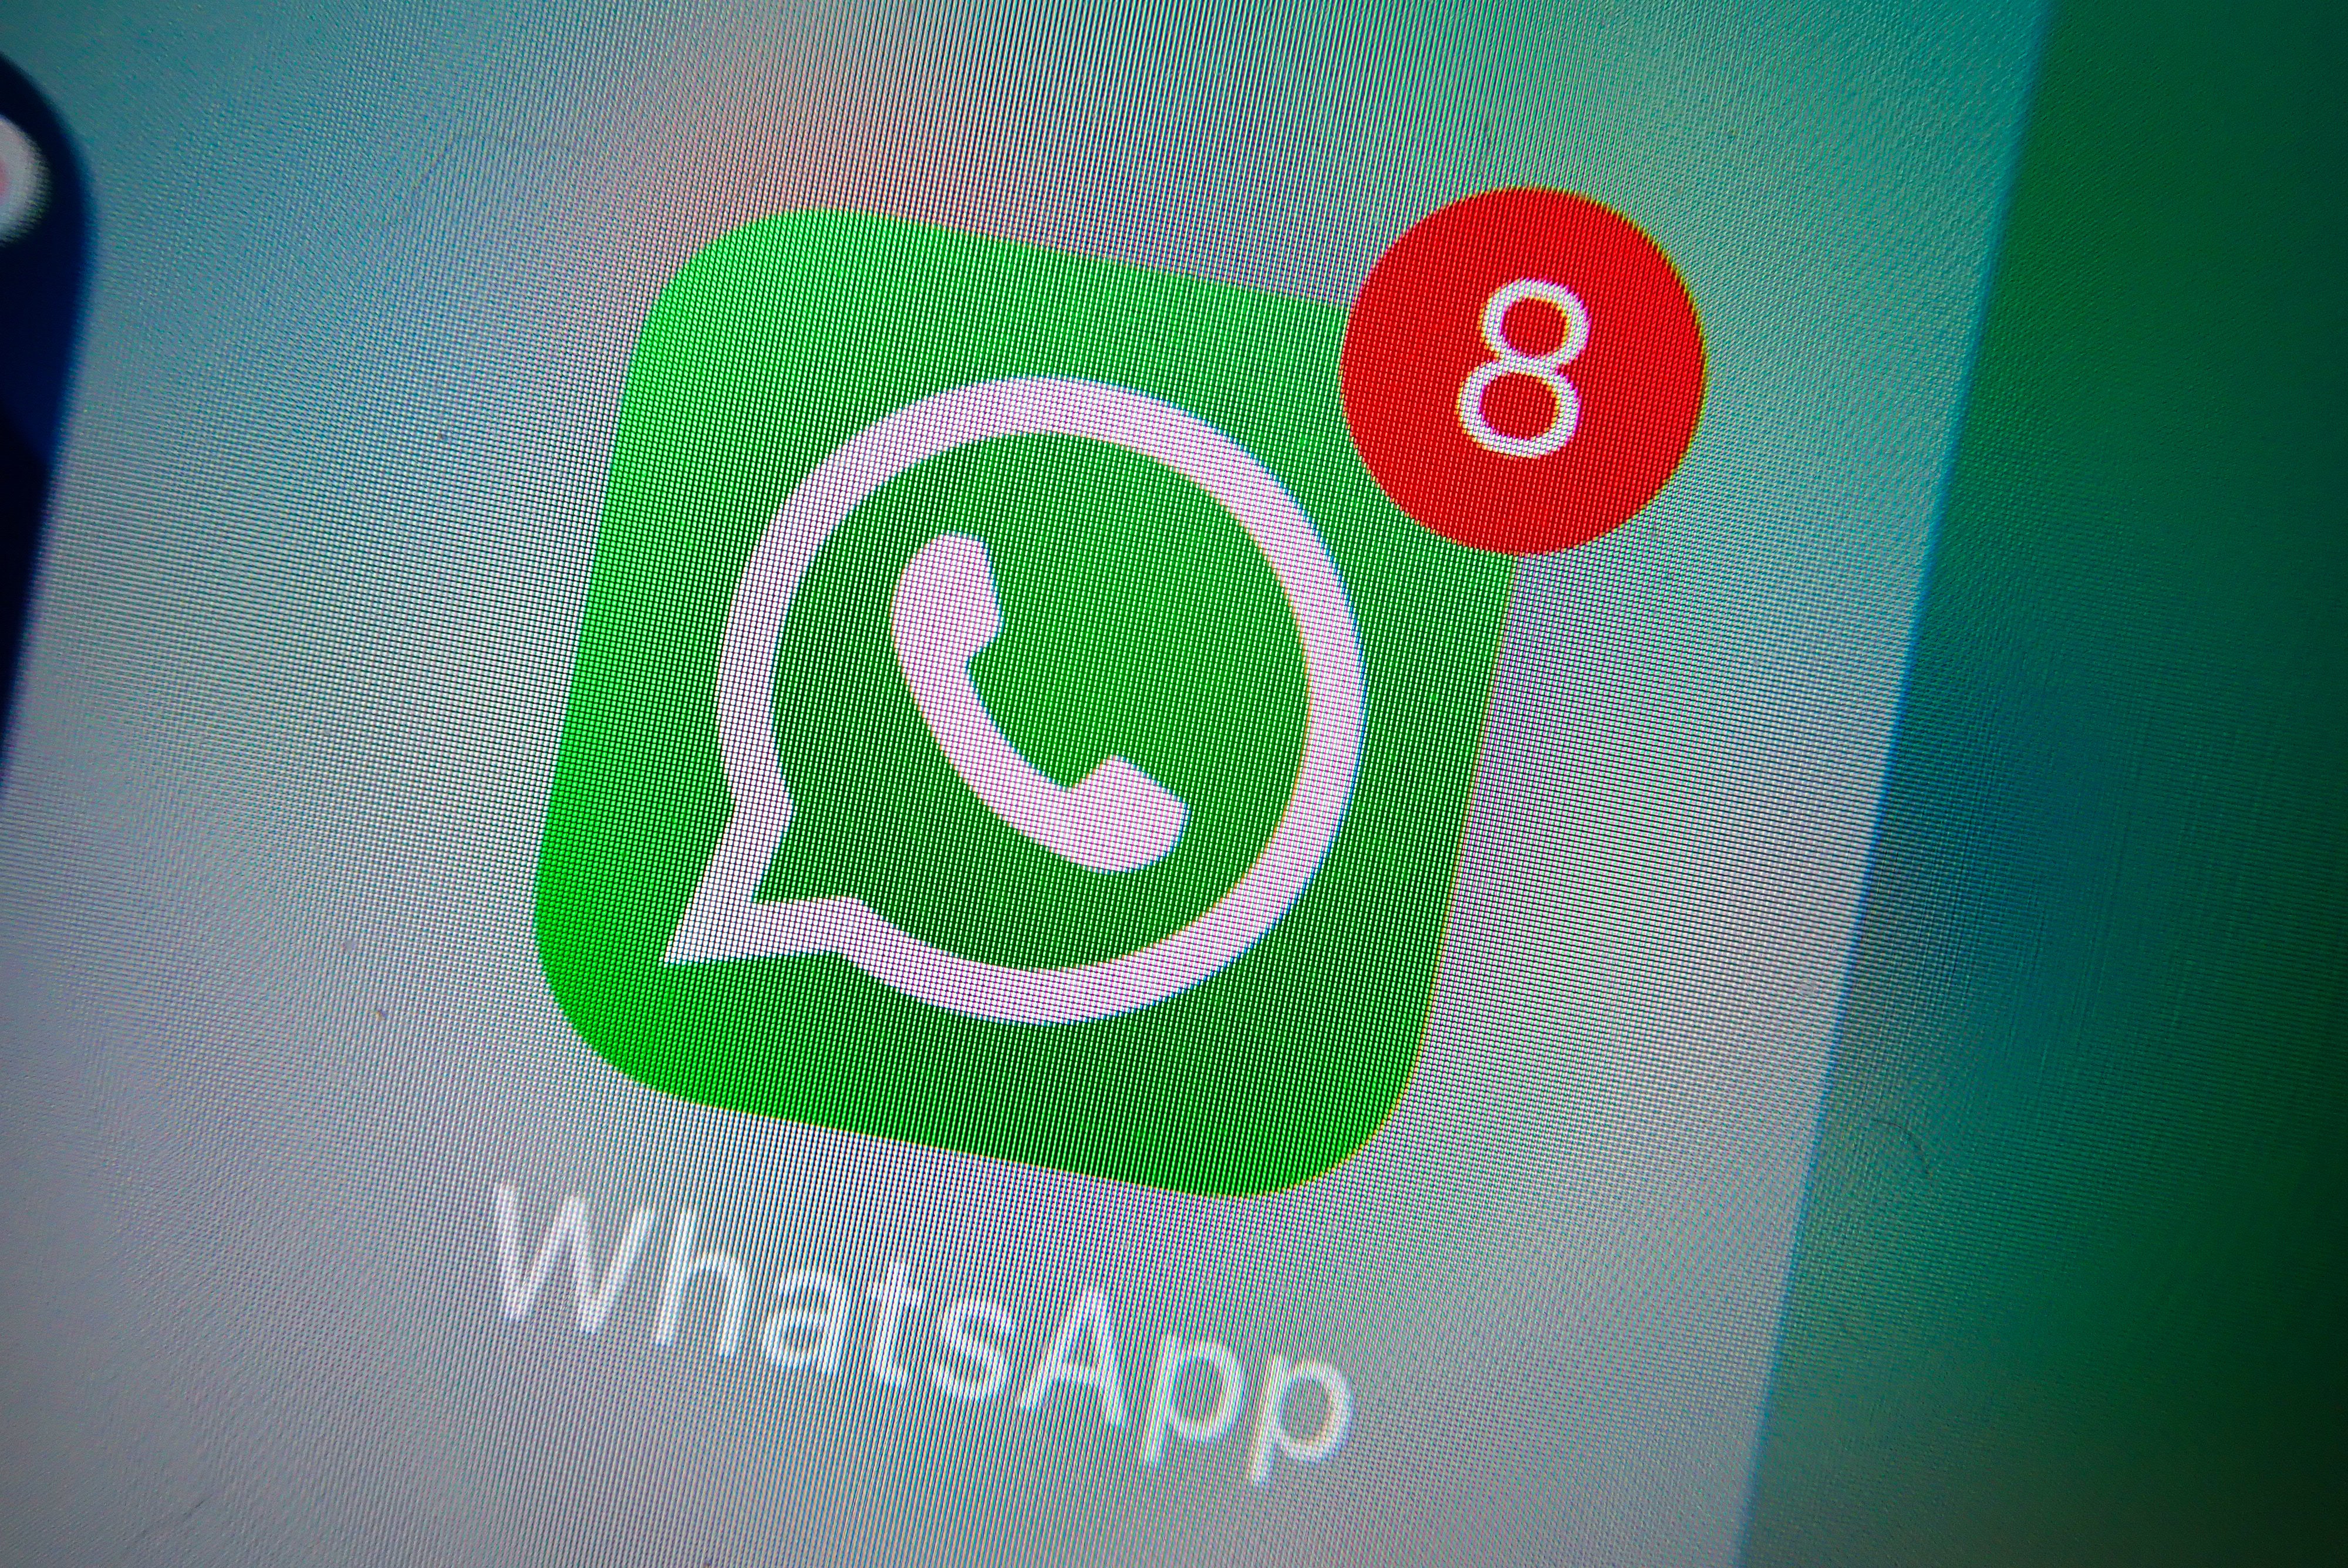 Hong Kong police have warned WhatsApp users to call their contacts before transferring any money. Photo: Shutterstock